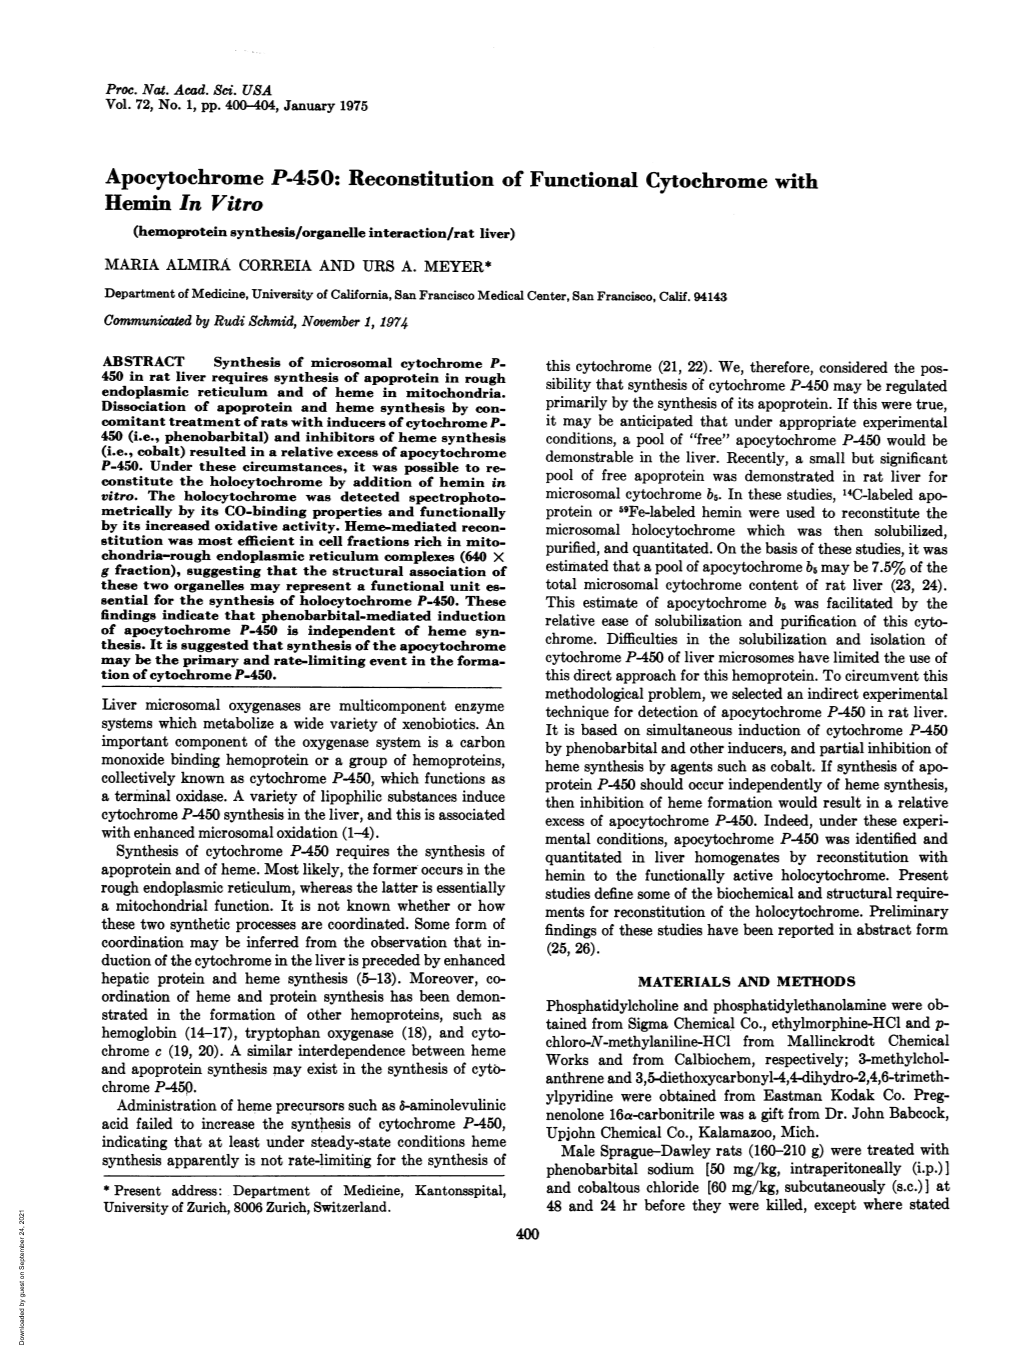 Apocytochrome P-450: Reconstitution of Functional Cytochrome With